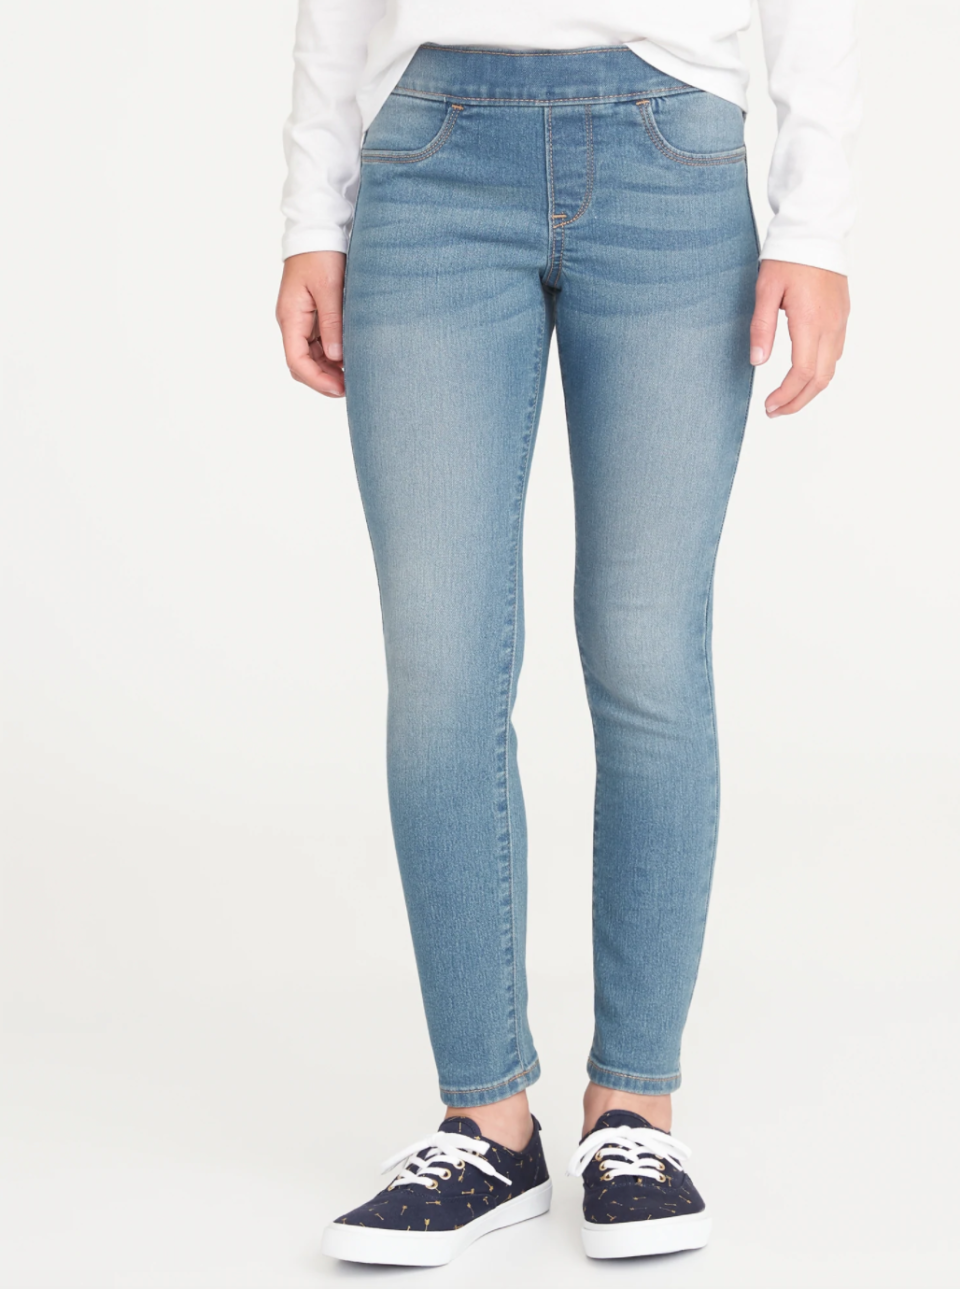 Skinny Built-In Tough Pull-On Jeans for Girls. Image via Old Navy.